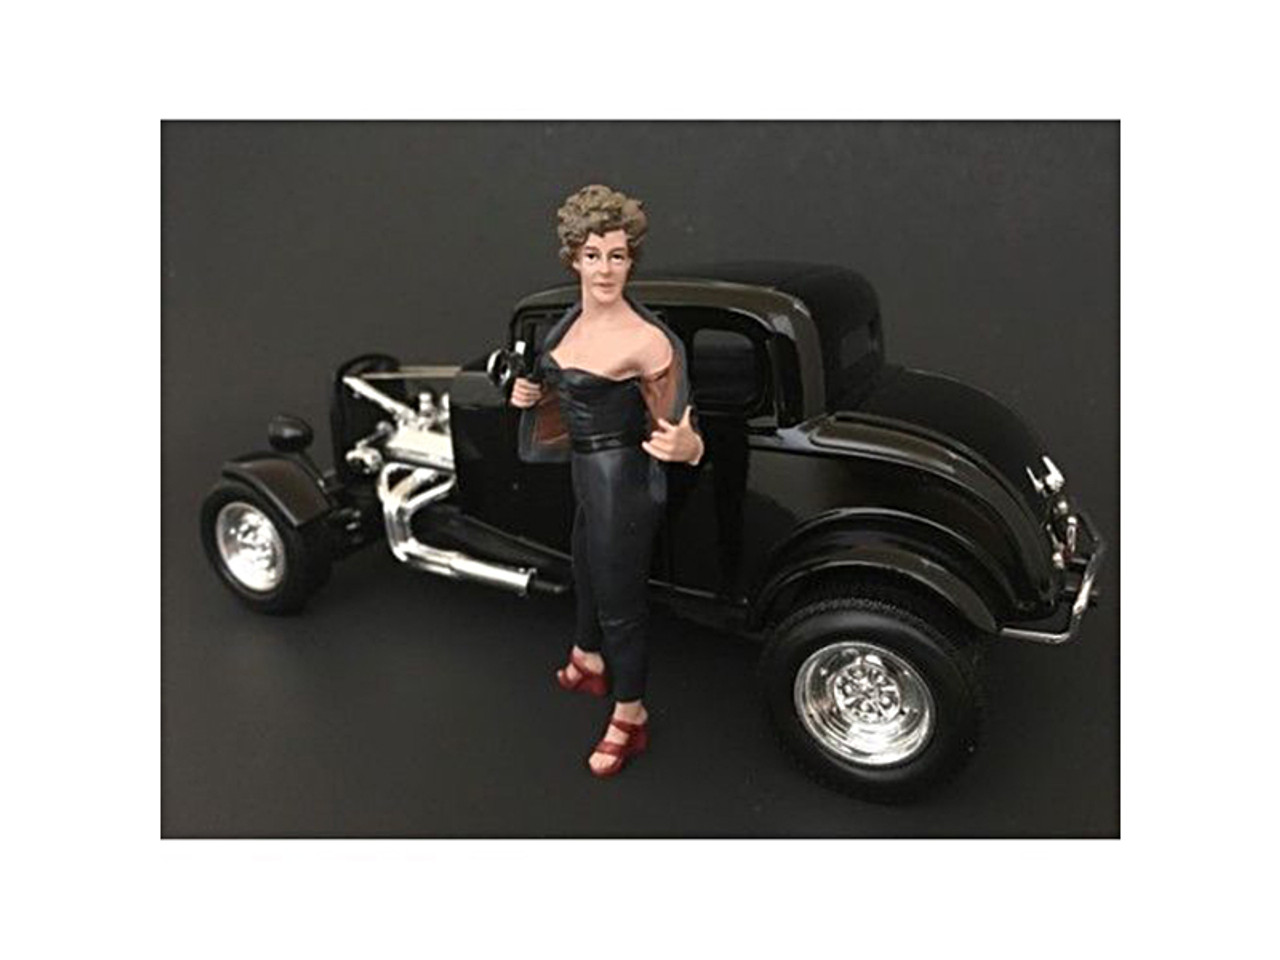 50's Style Figure II for 1/24 Scale Models by American Diorama